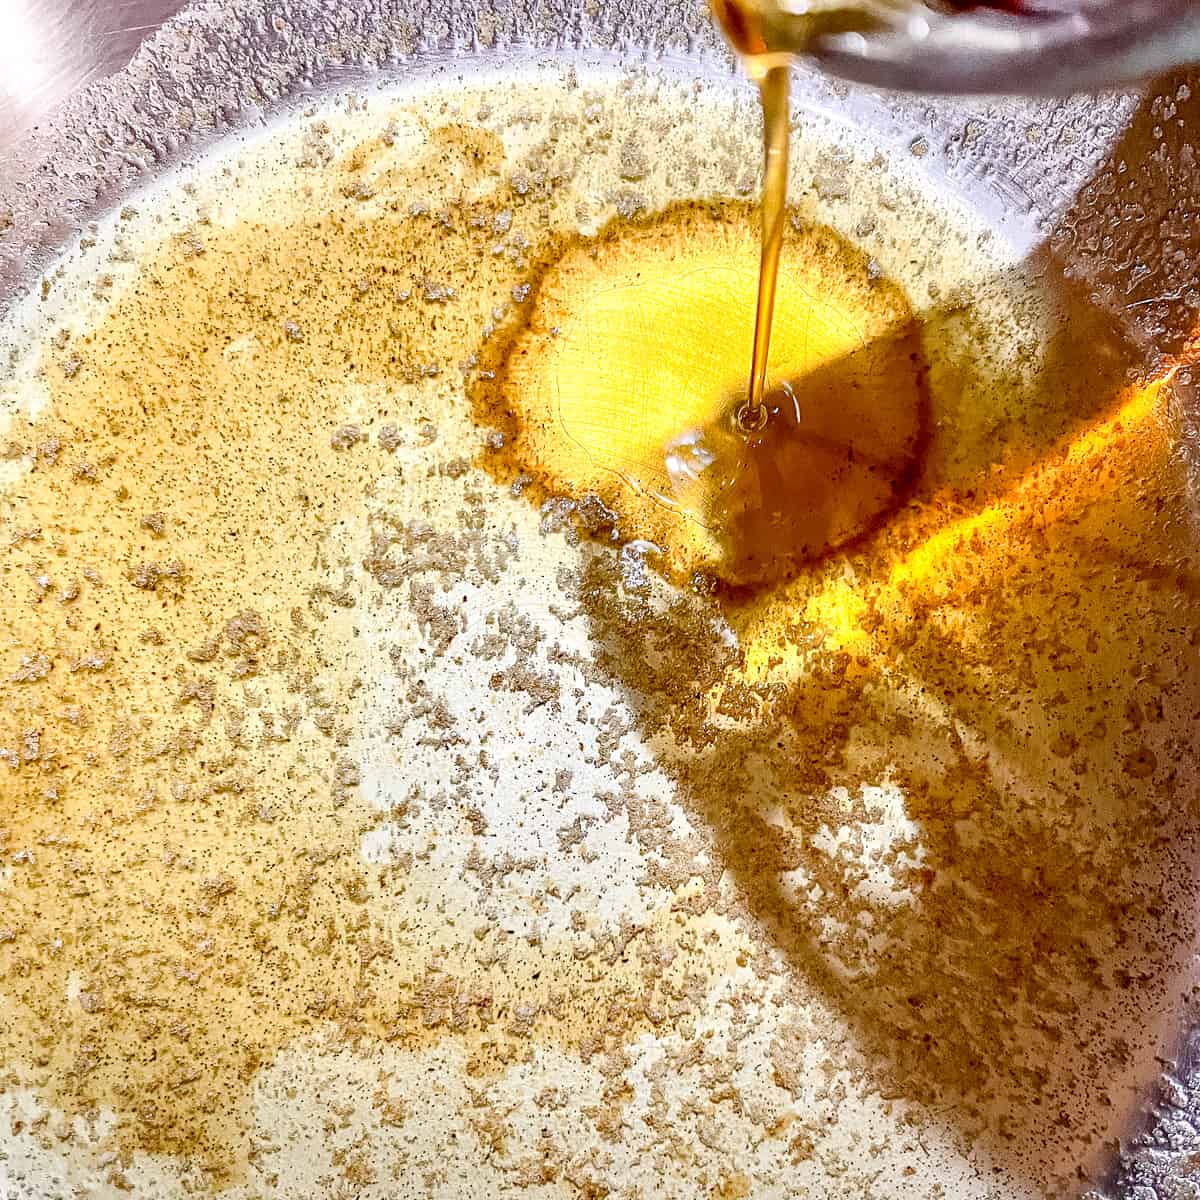 adding maple syrup to brown butter in skillet.